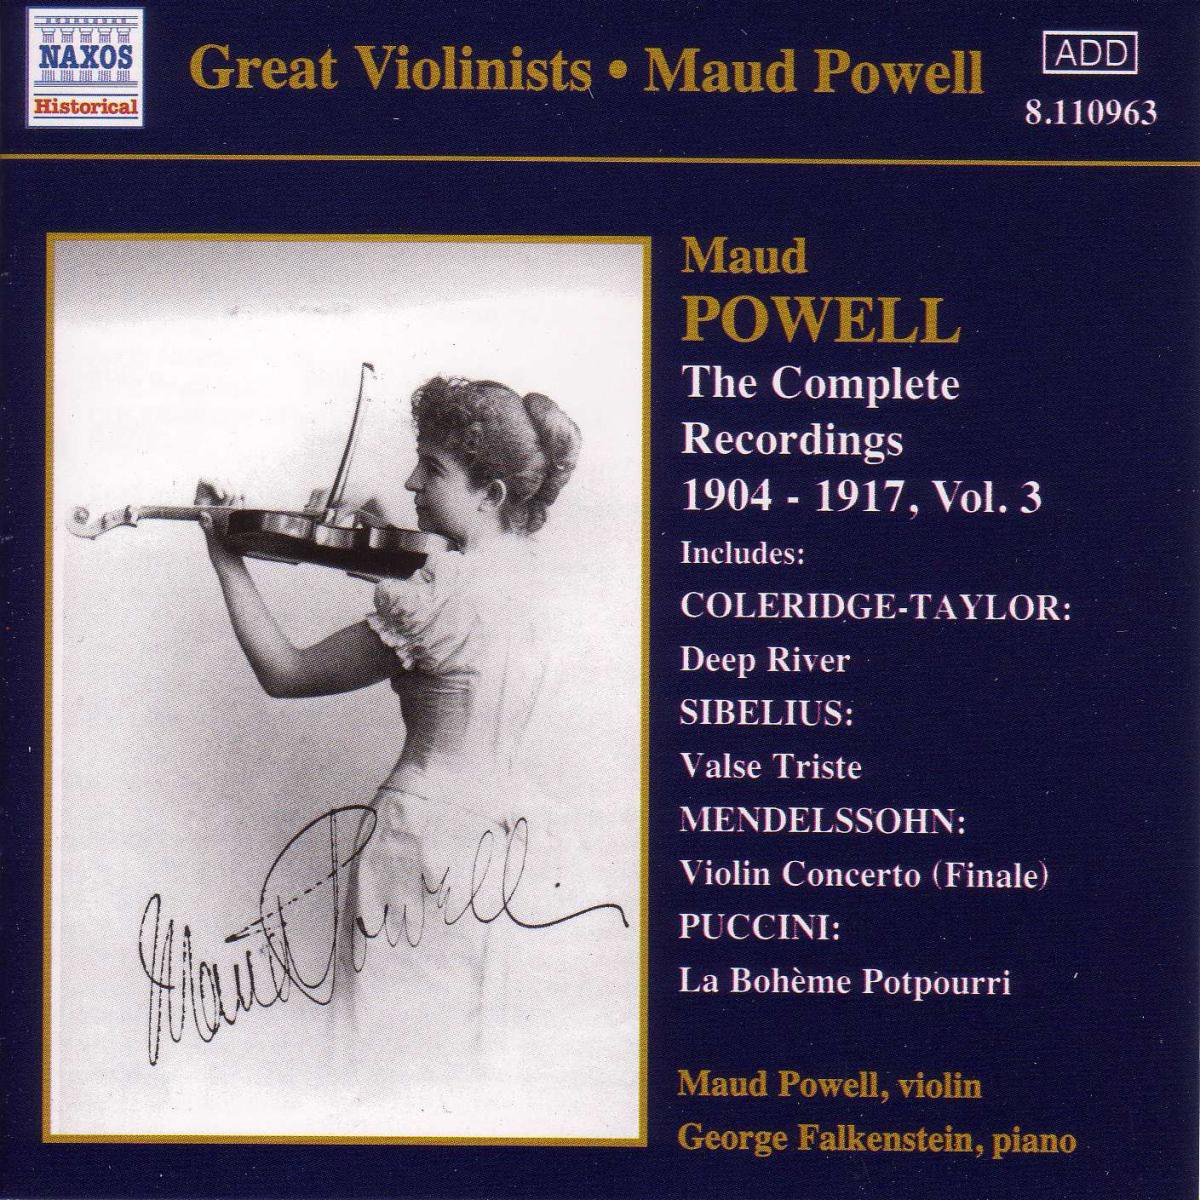 GREAT VIOLINISTS - POWELL vol. 3